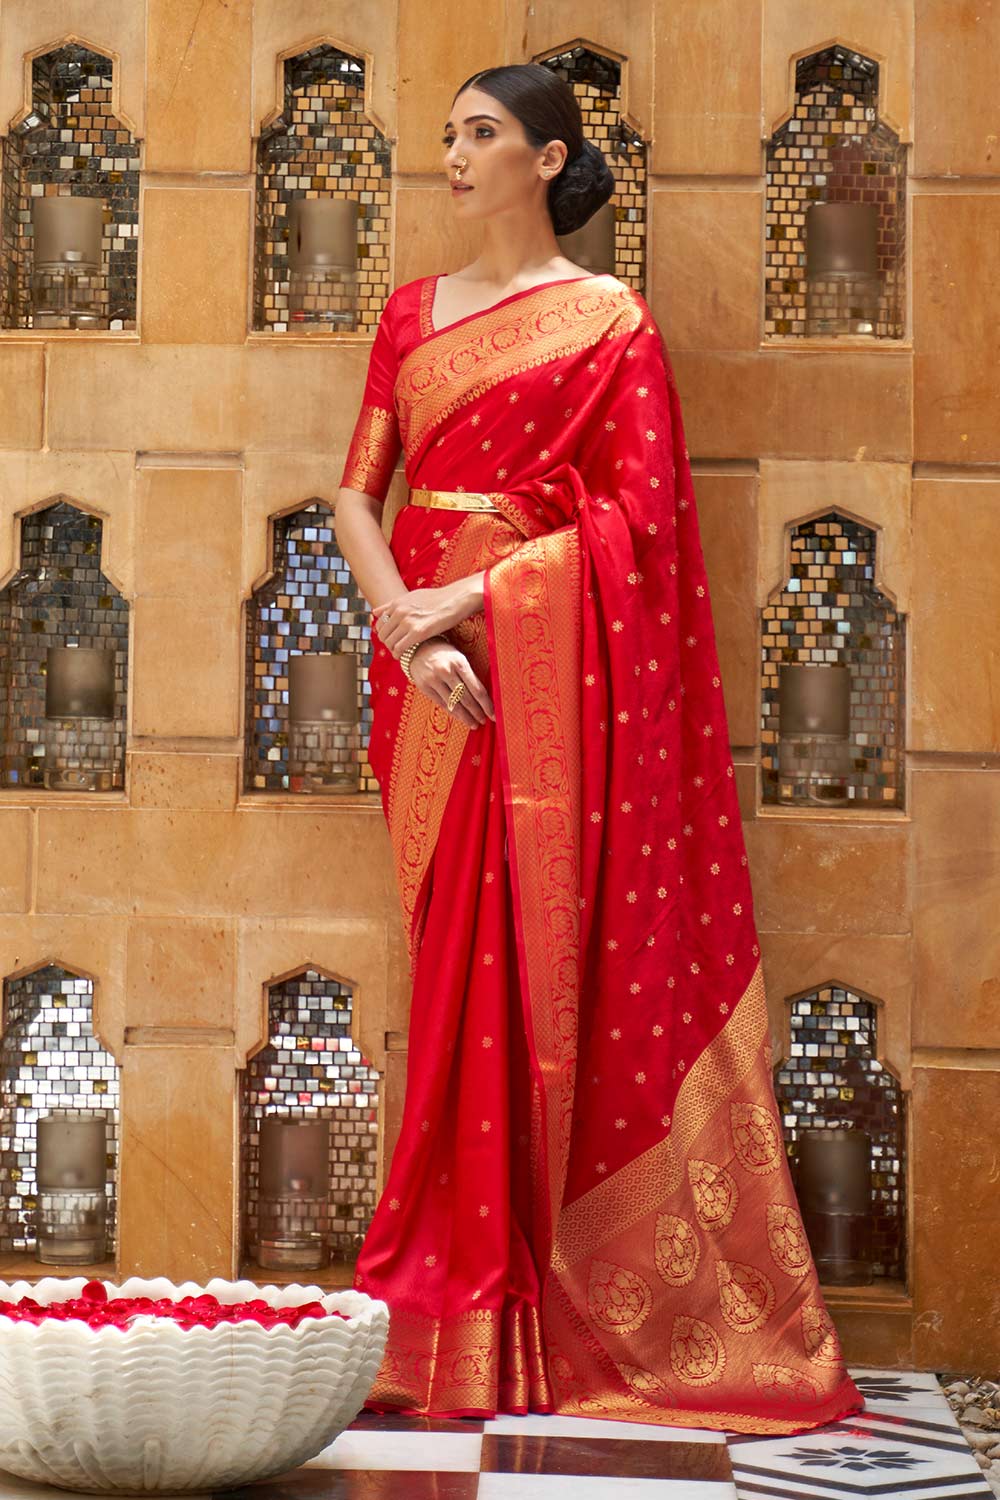 Shop Red Silk Embroidered Lace Saree at best offer at our  Store - One Minute Saree